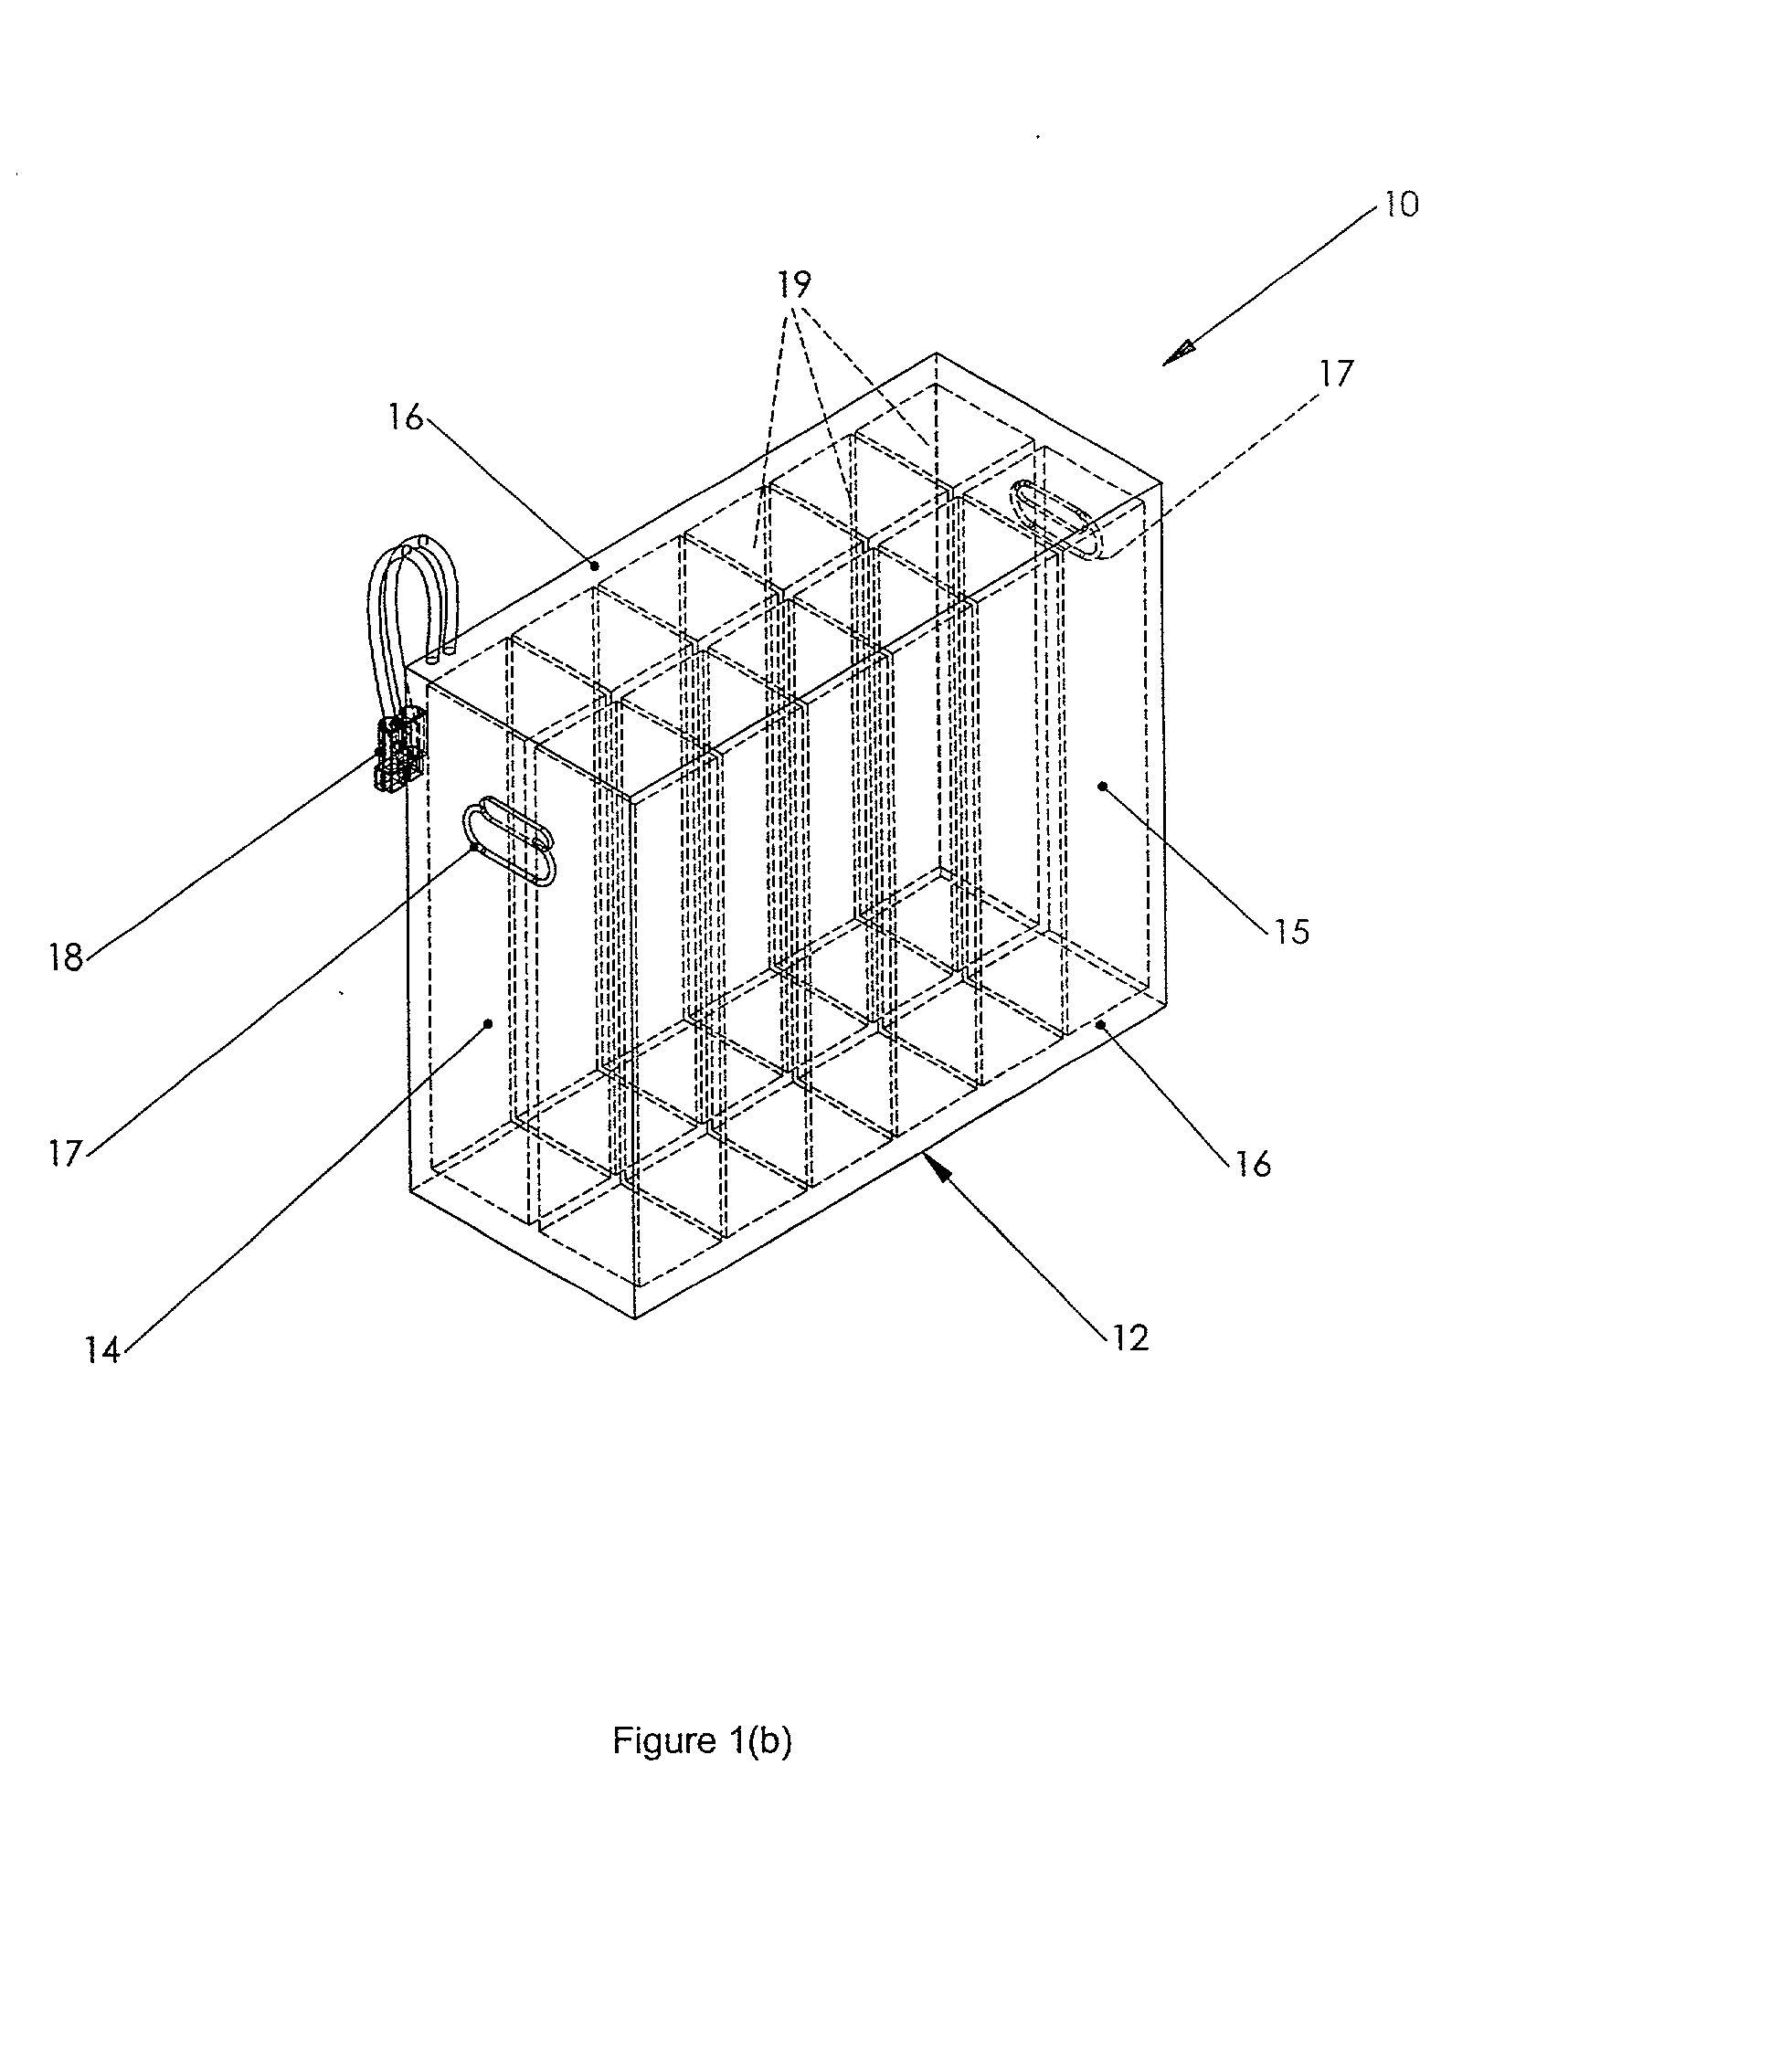 Hybrid power supply apparatus for battery replacement applications